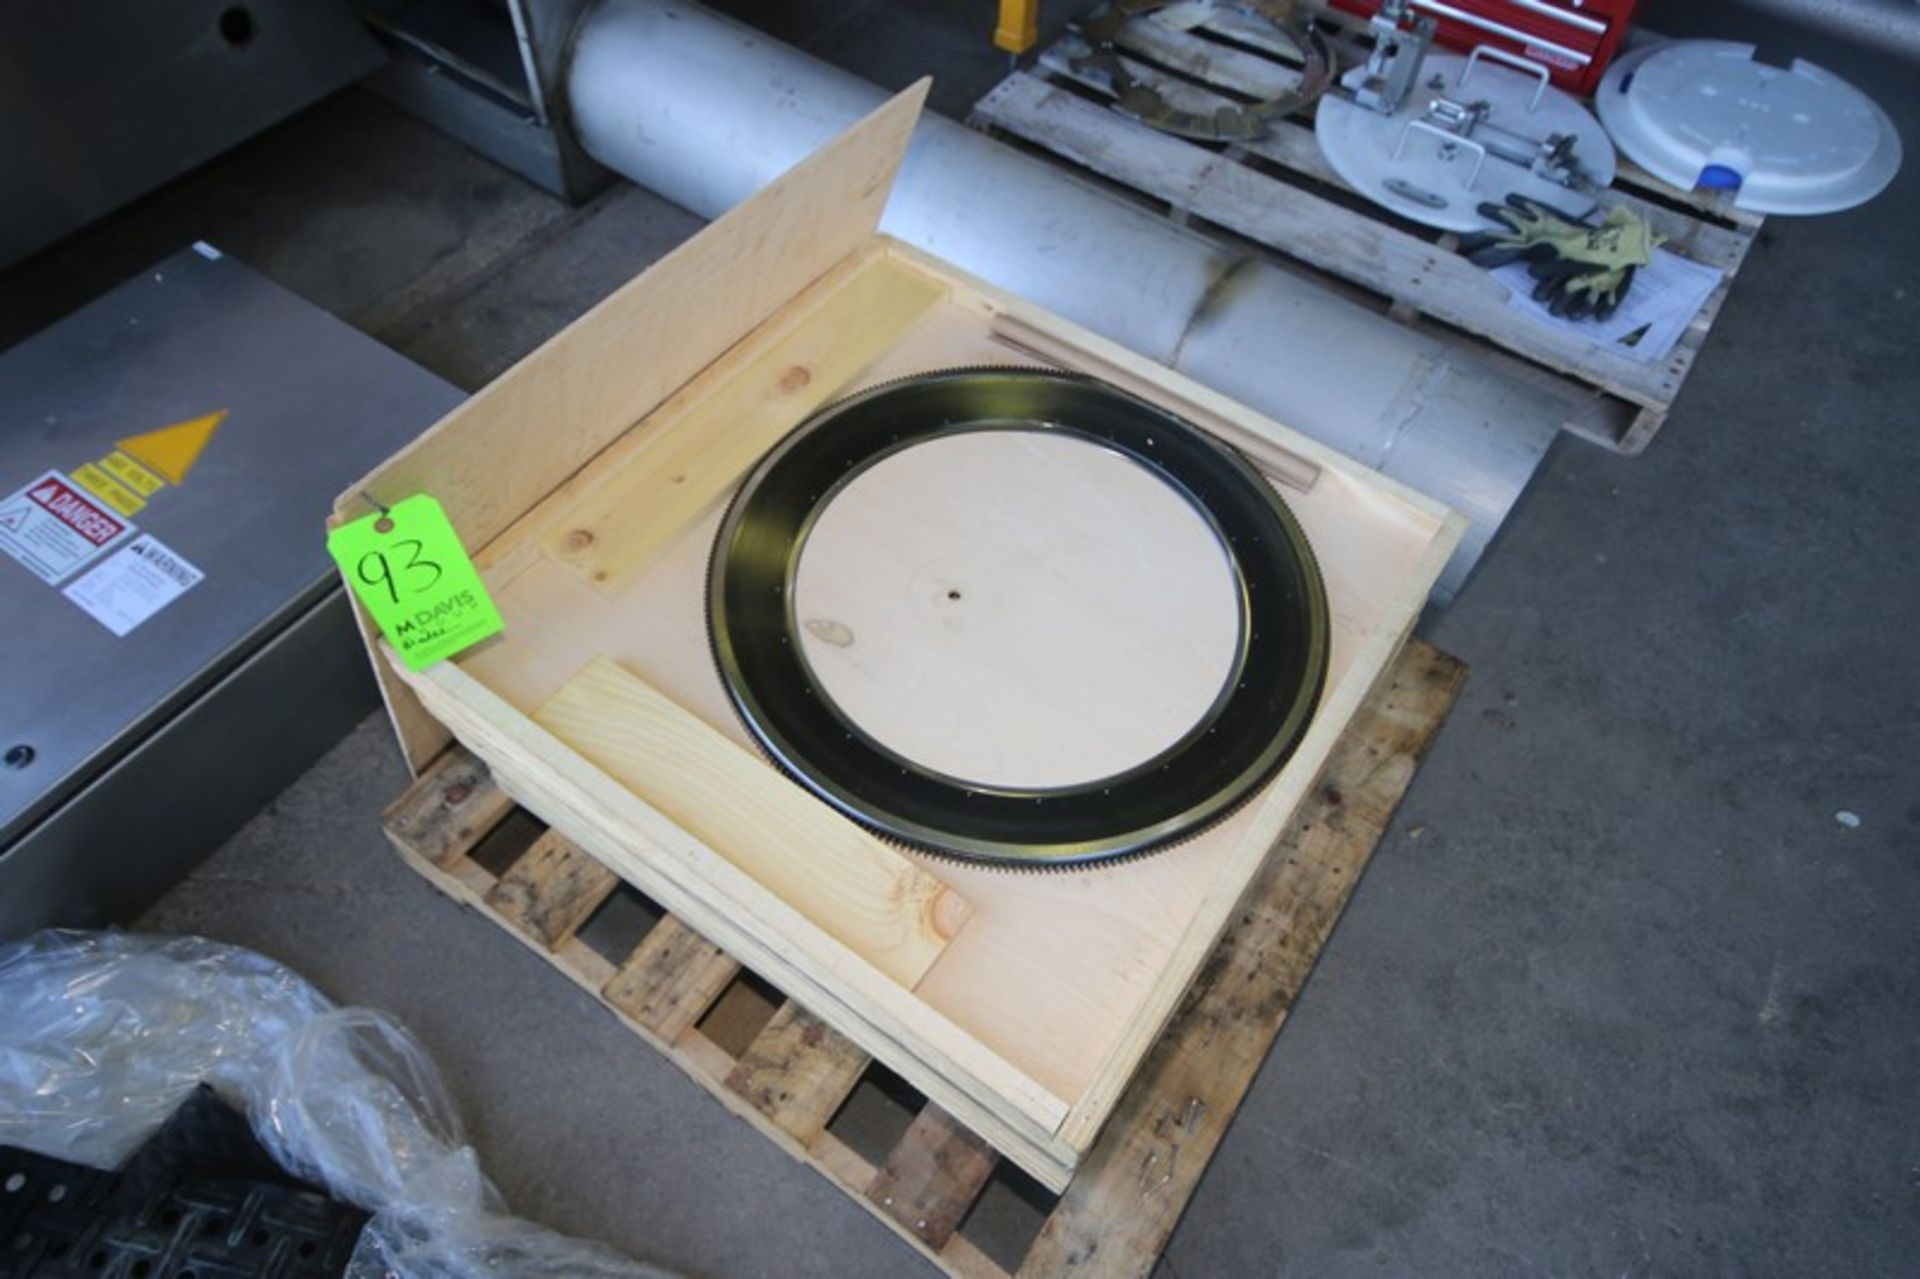 NEW Pizzamatic Blades, Aprox. 22-1/2" Dia., In Wooden Box Crates (LOCATED IN MEDFORD, WI) (